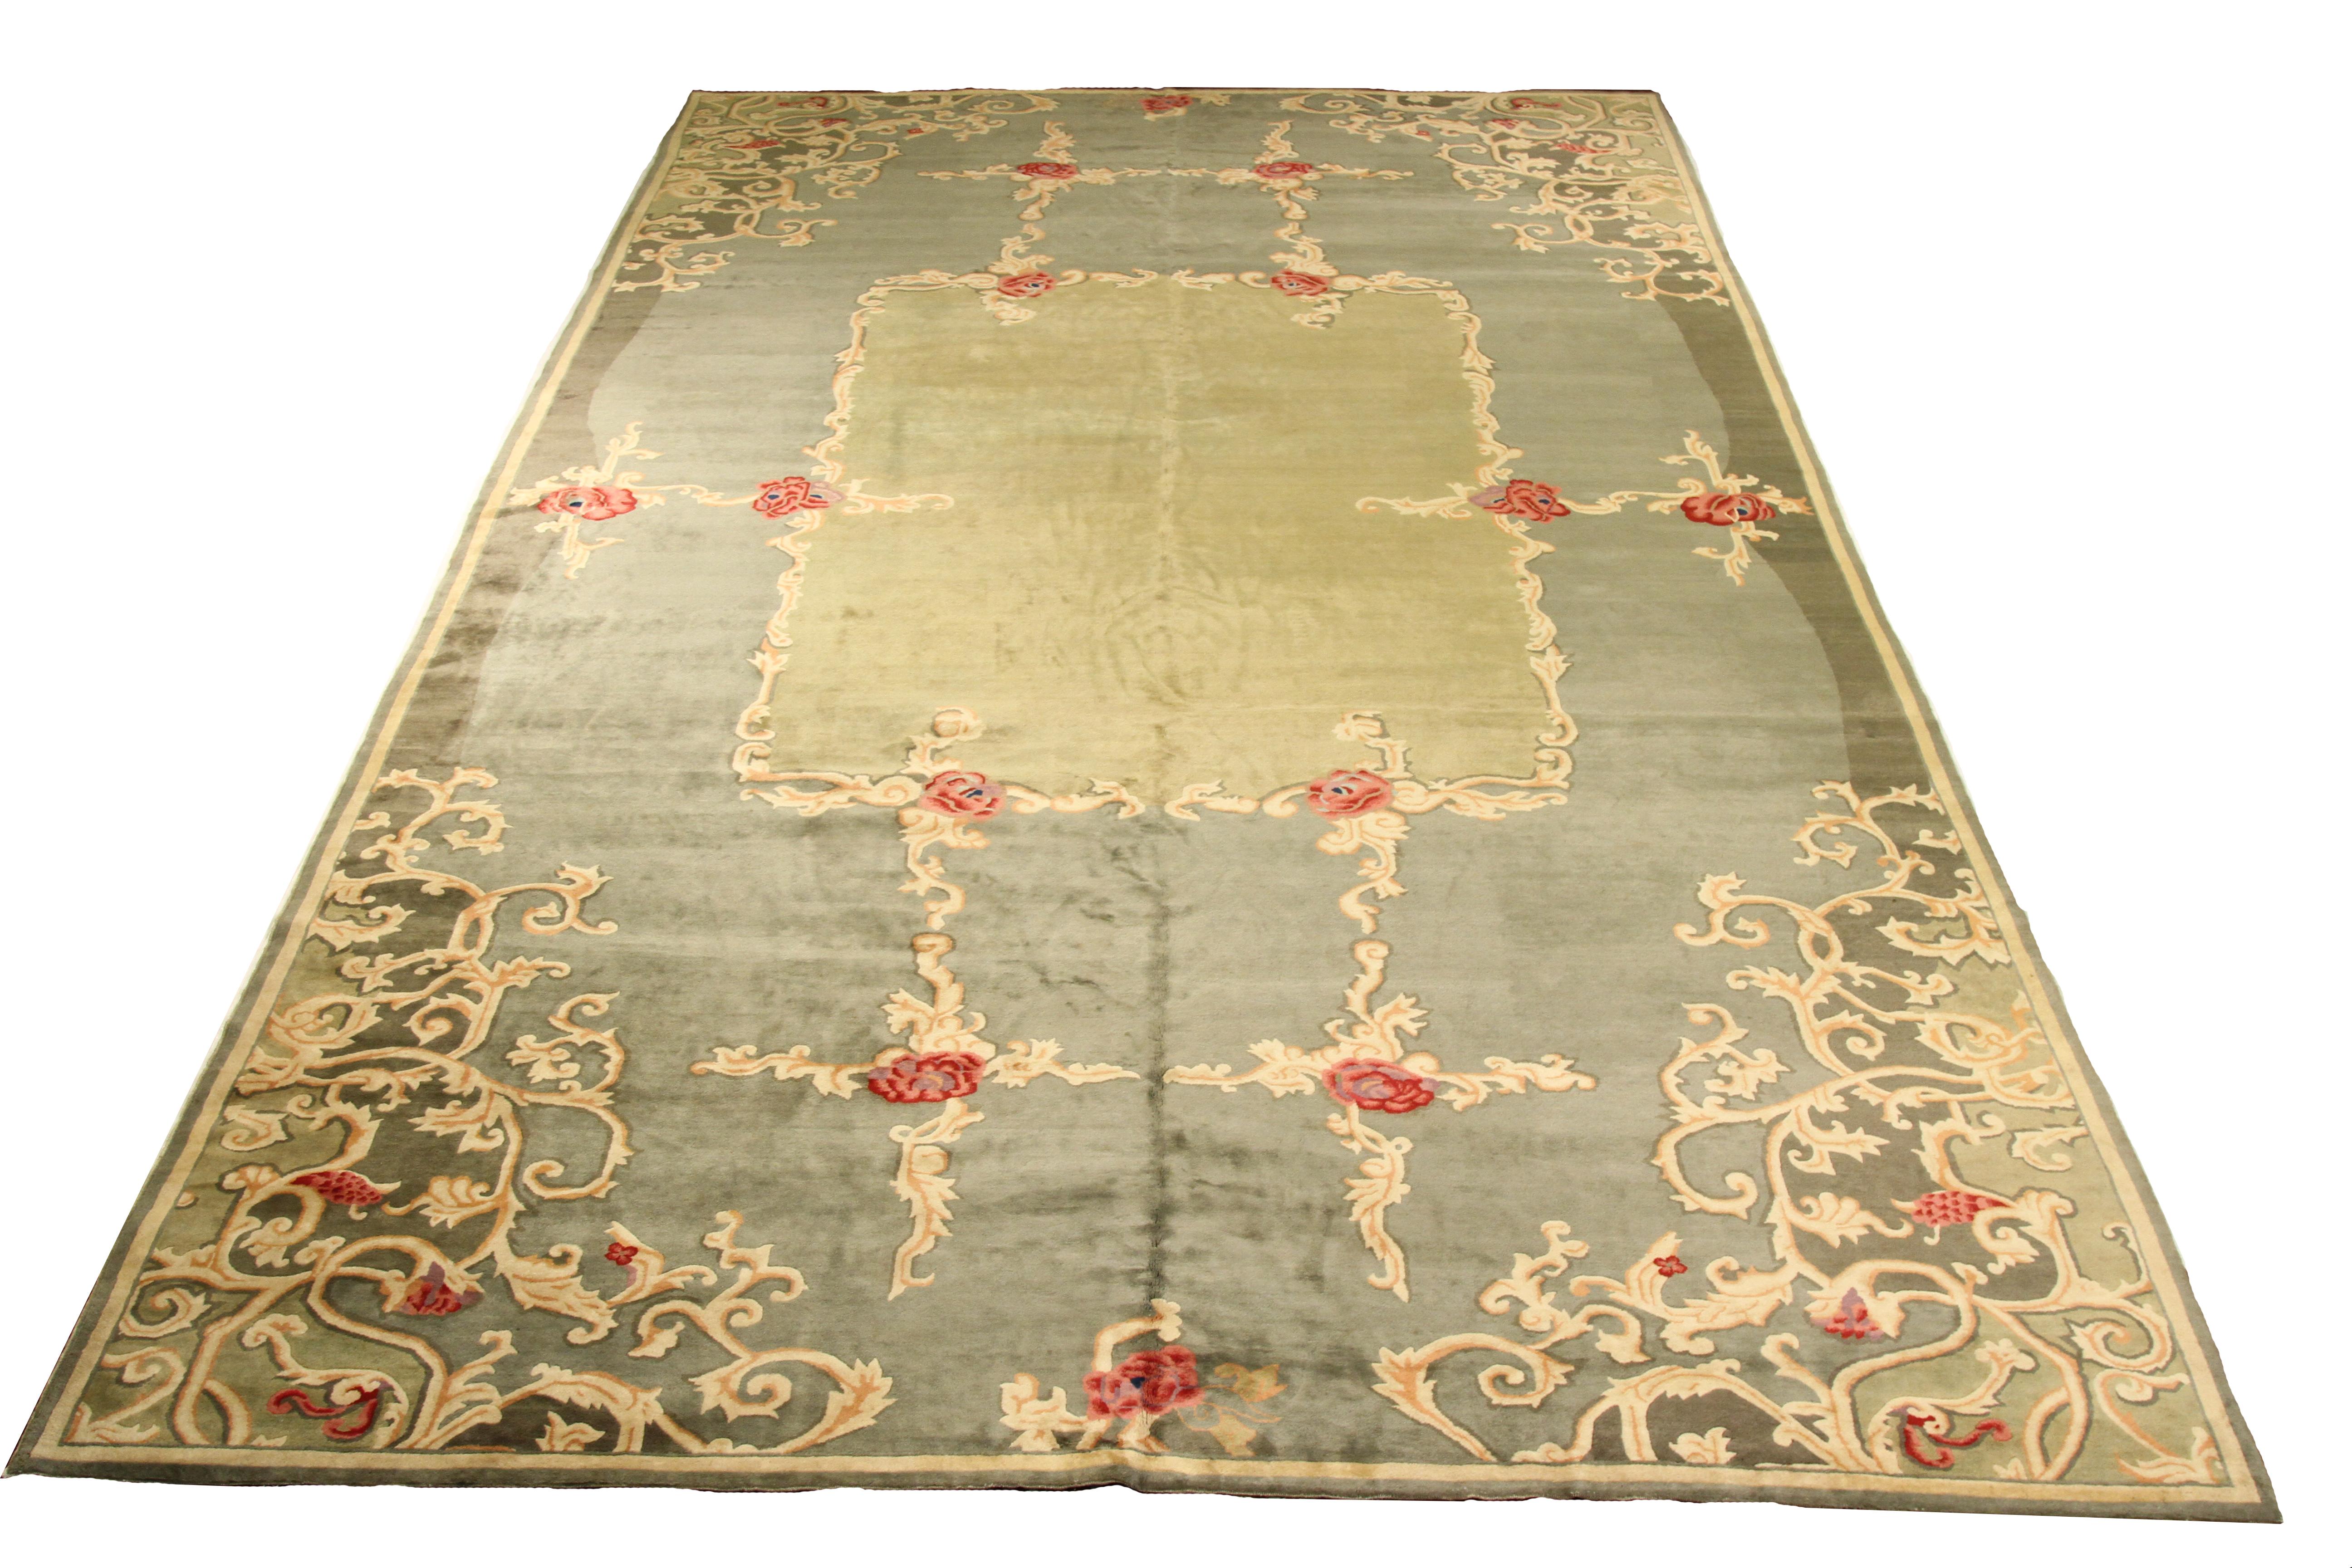 Antique handmade Chinese area rug made from fine wool and all-natural vegetable dyes that are safe for people and pets. This beautiful piece features a rich field of floral details in bright colors that was so popular in the 1920s when the Art Deco